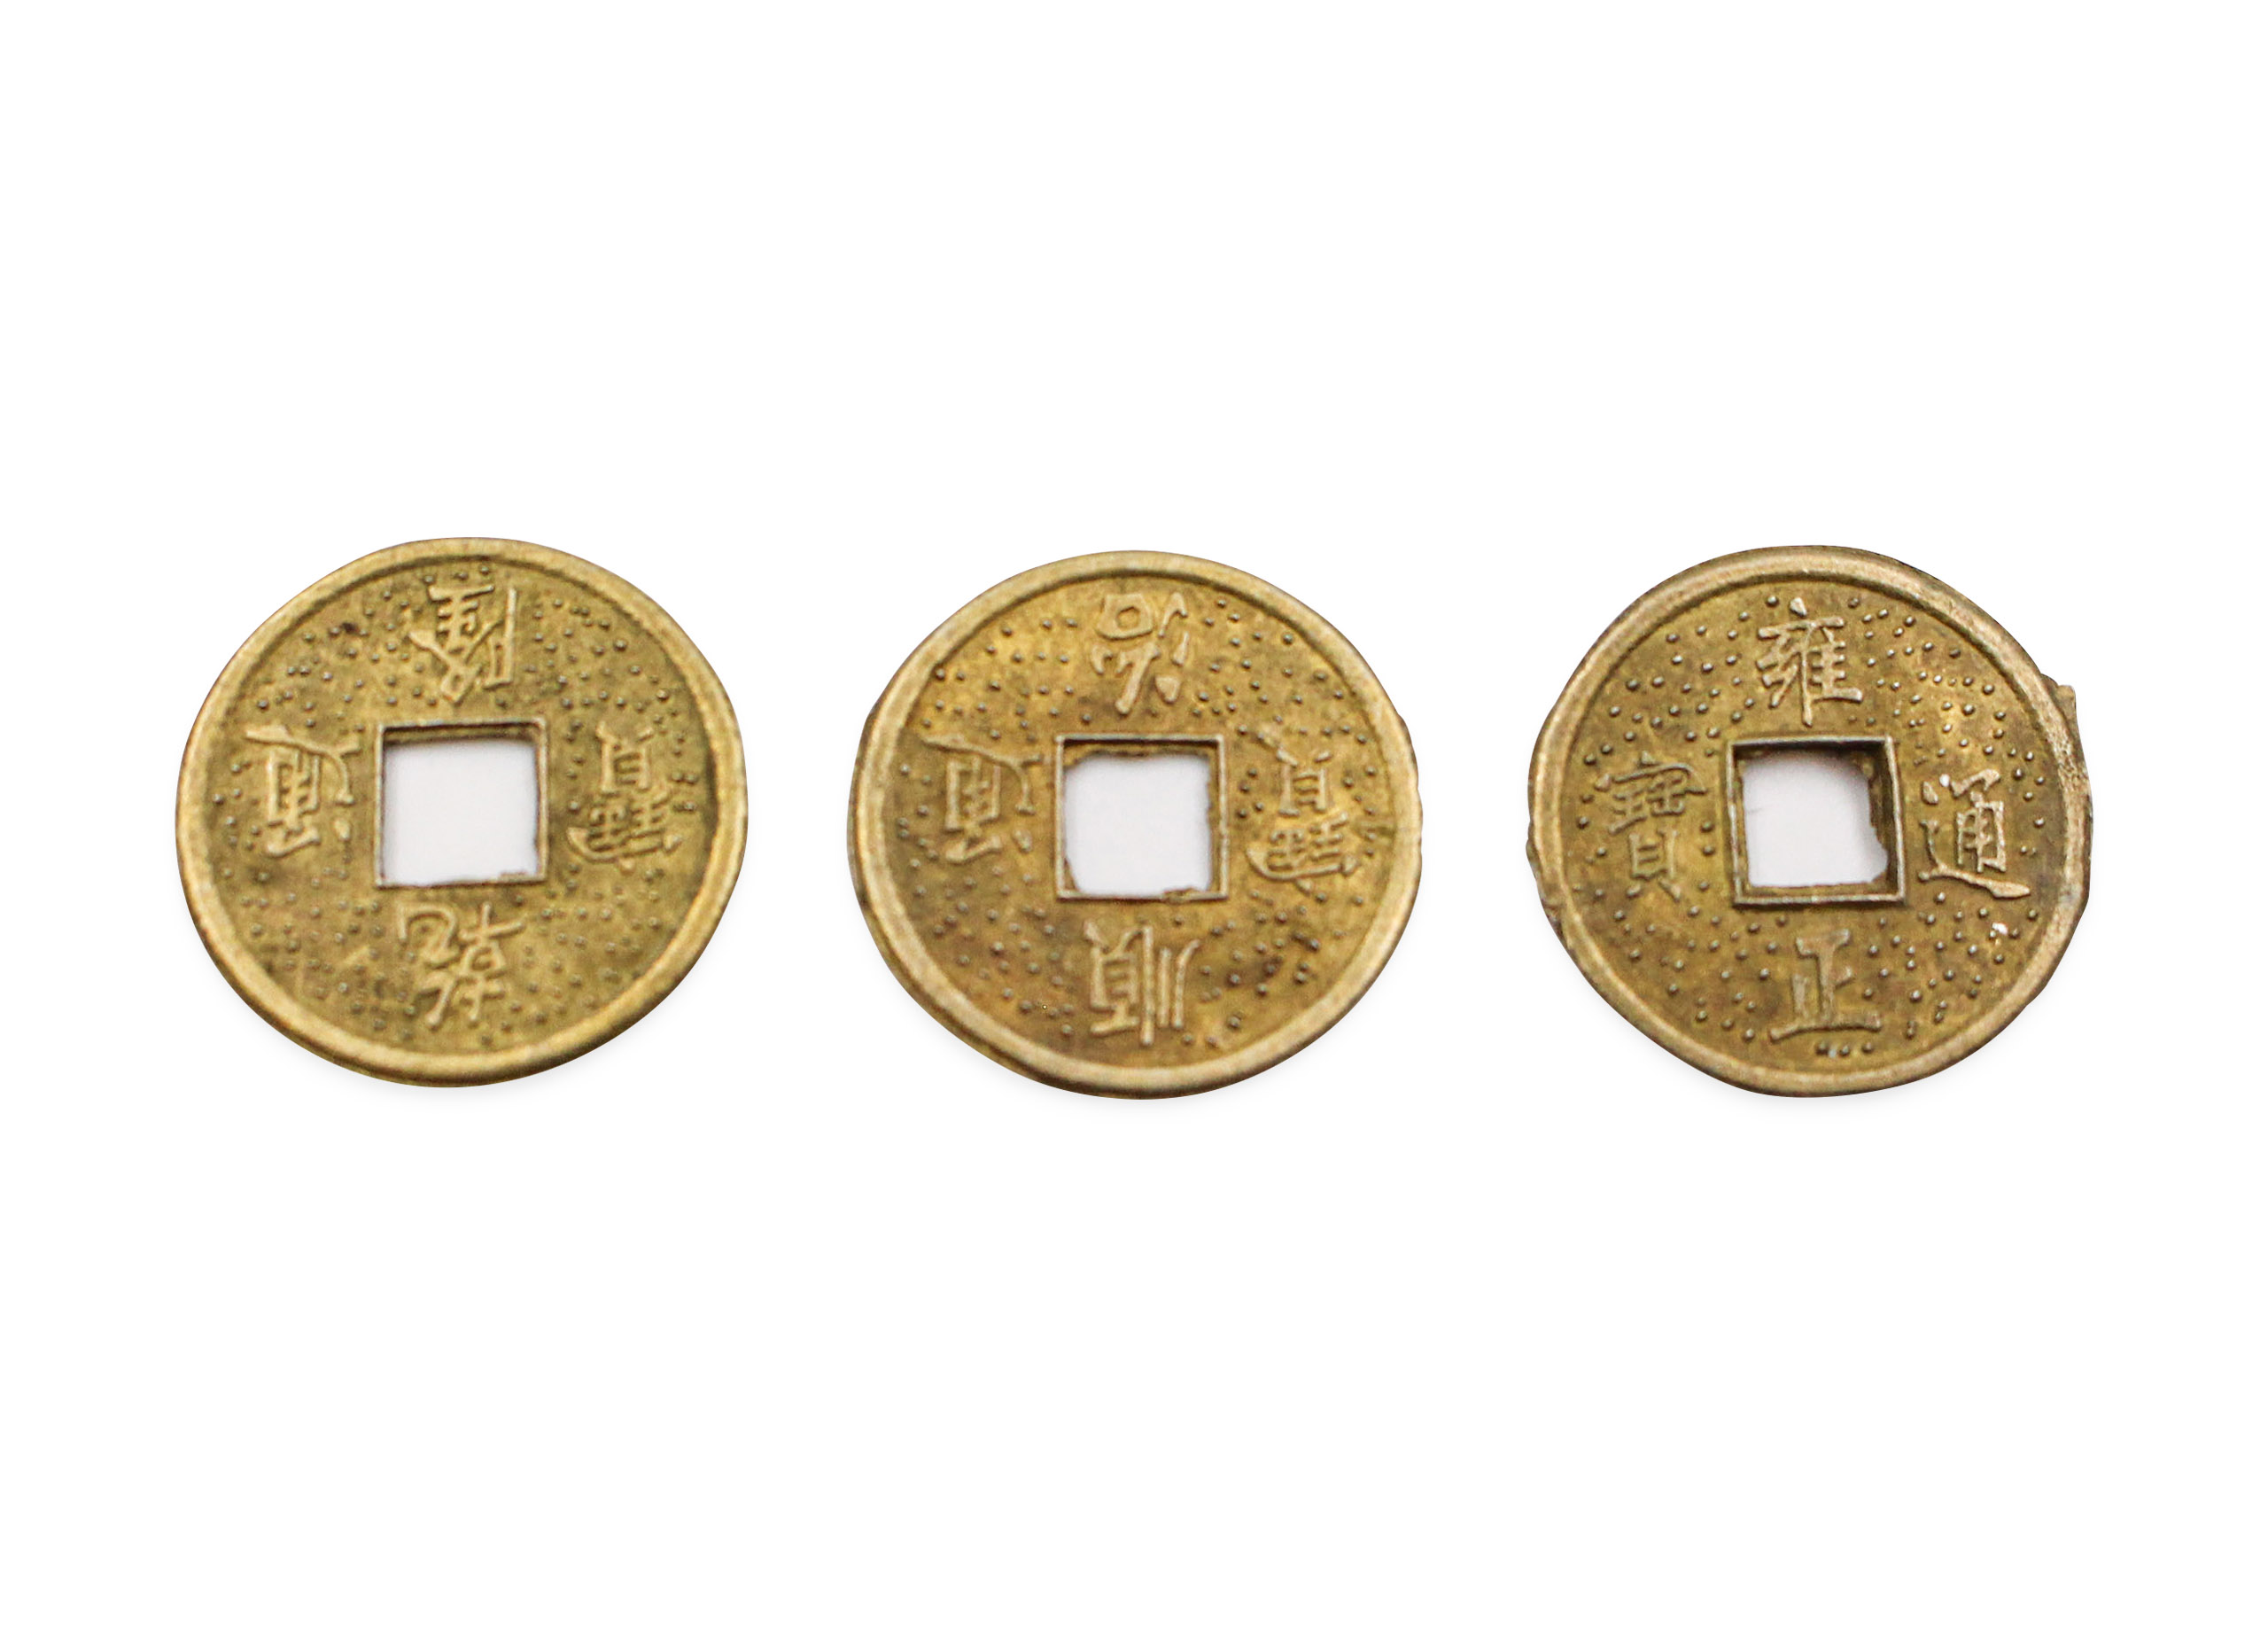 ONE SMALL i-ching coin for feng shui - Crystal Dreams